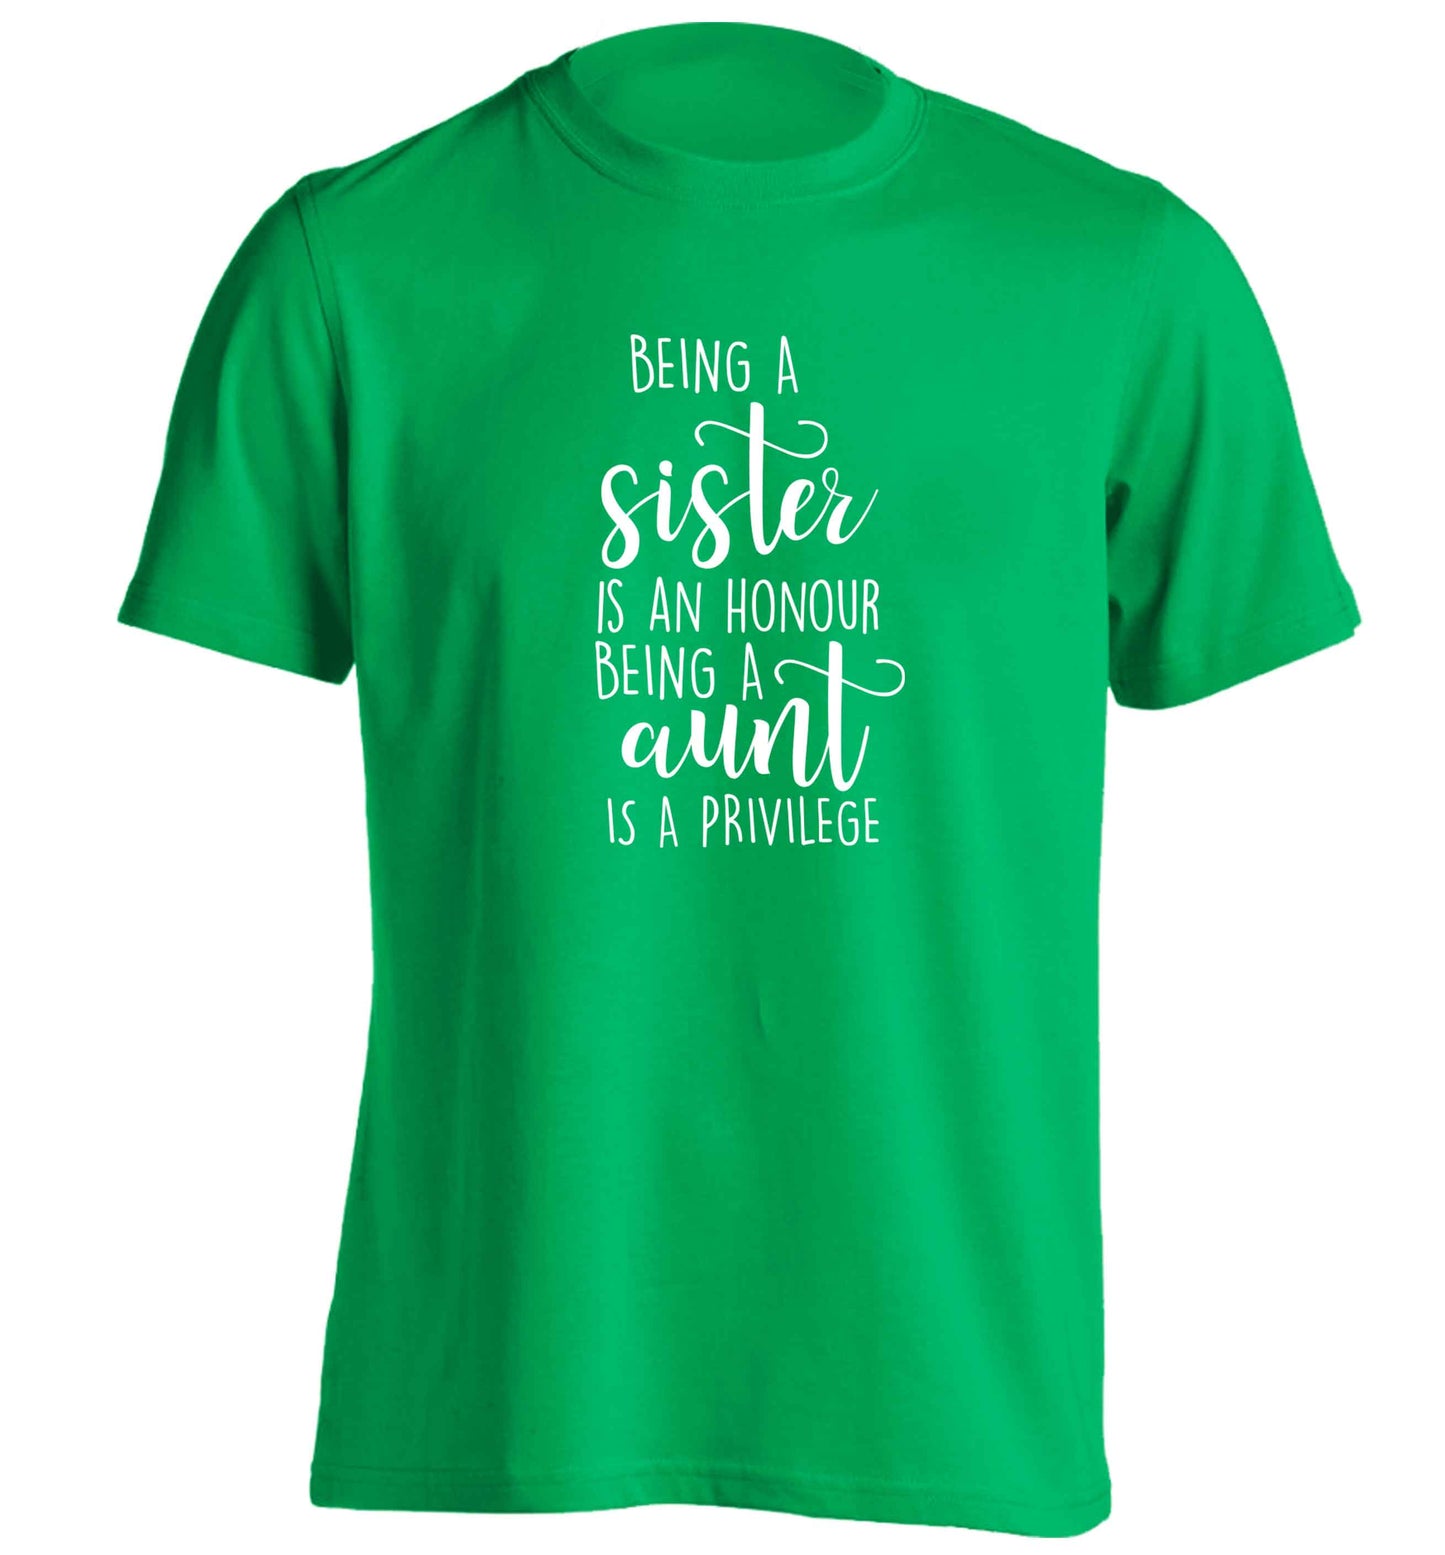 Being a sister is an honour being an auntie is a privilege adults unisex green Tshirt 2XL